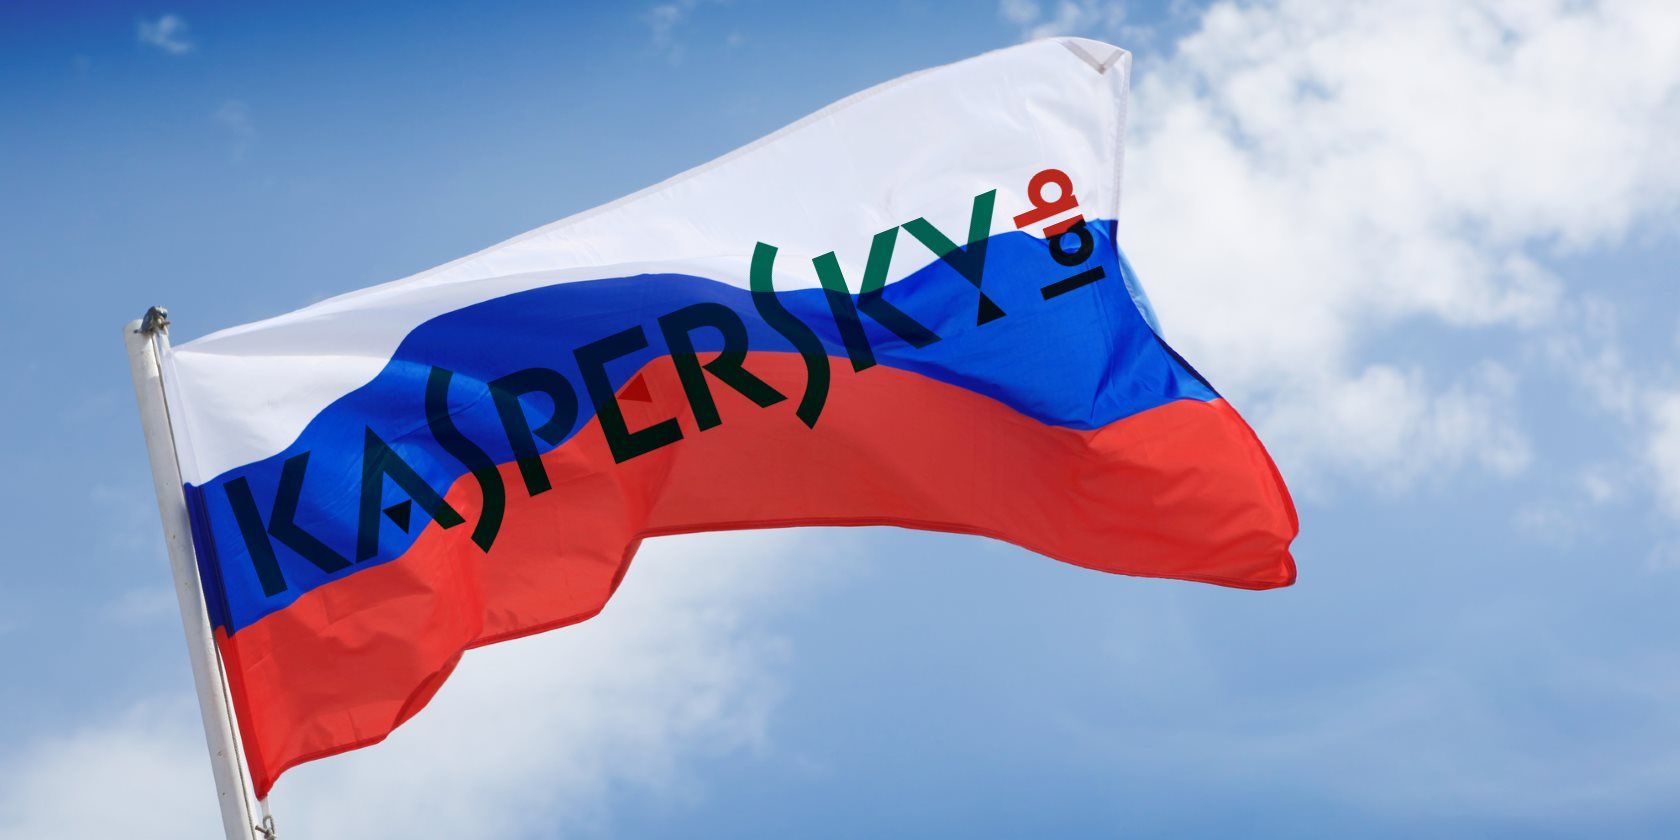 Russian flag with Kaspersky Labs logo superimposed